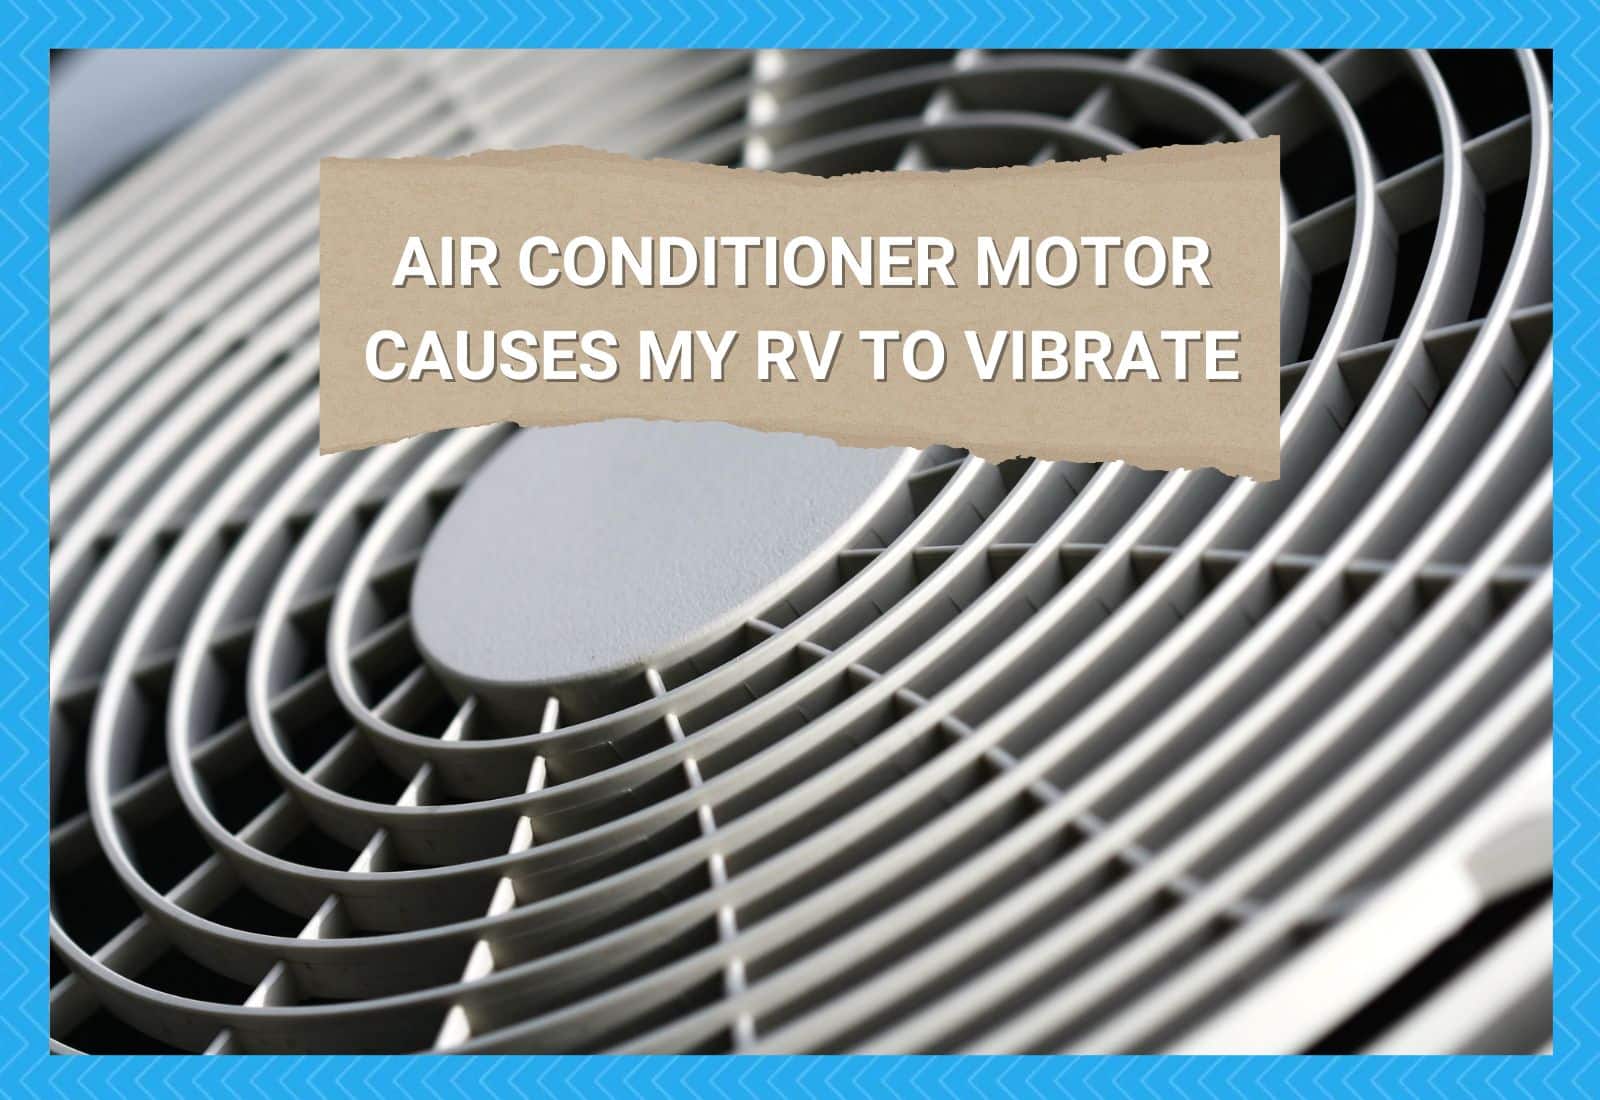 Air Conditioner Motor Causes My RV To Vibrate